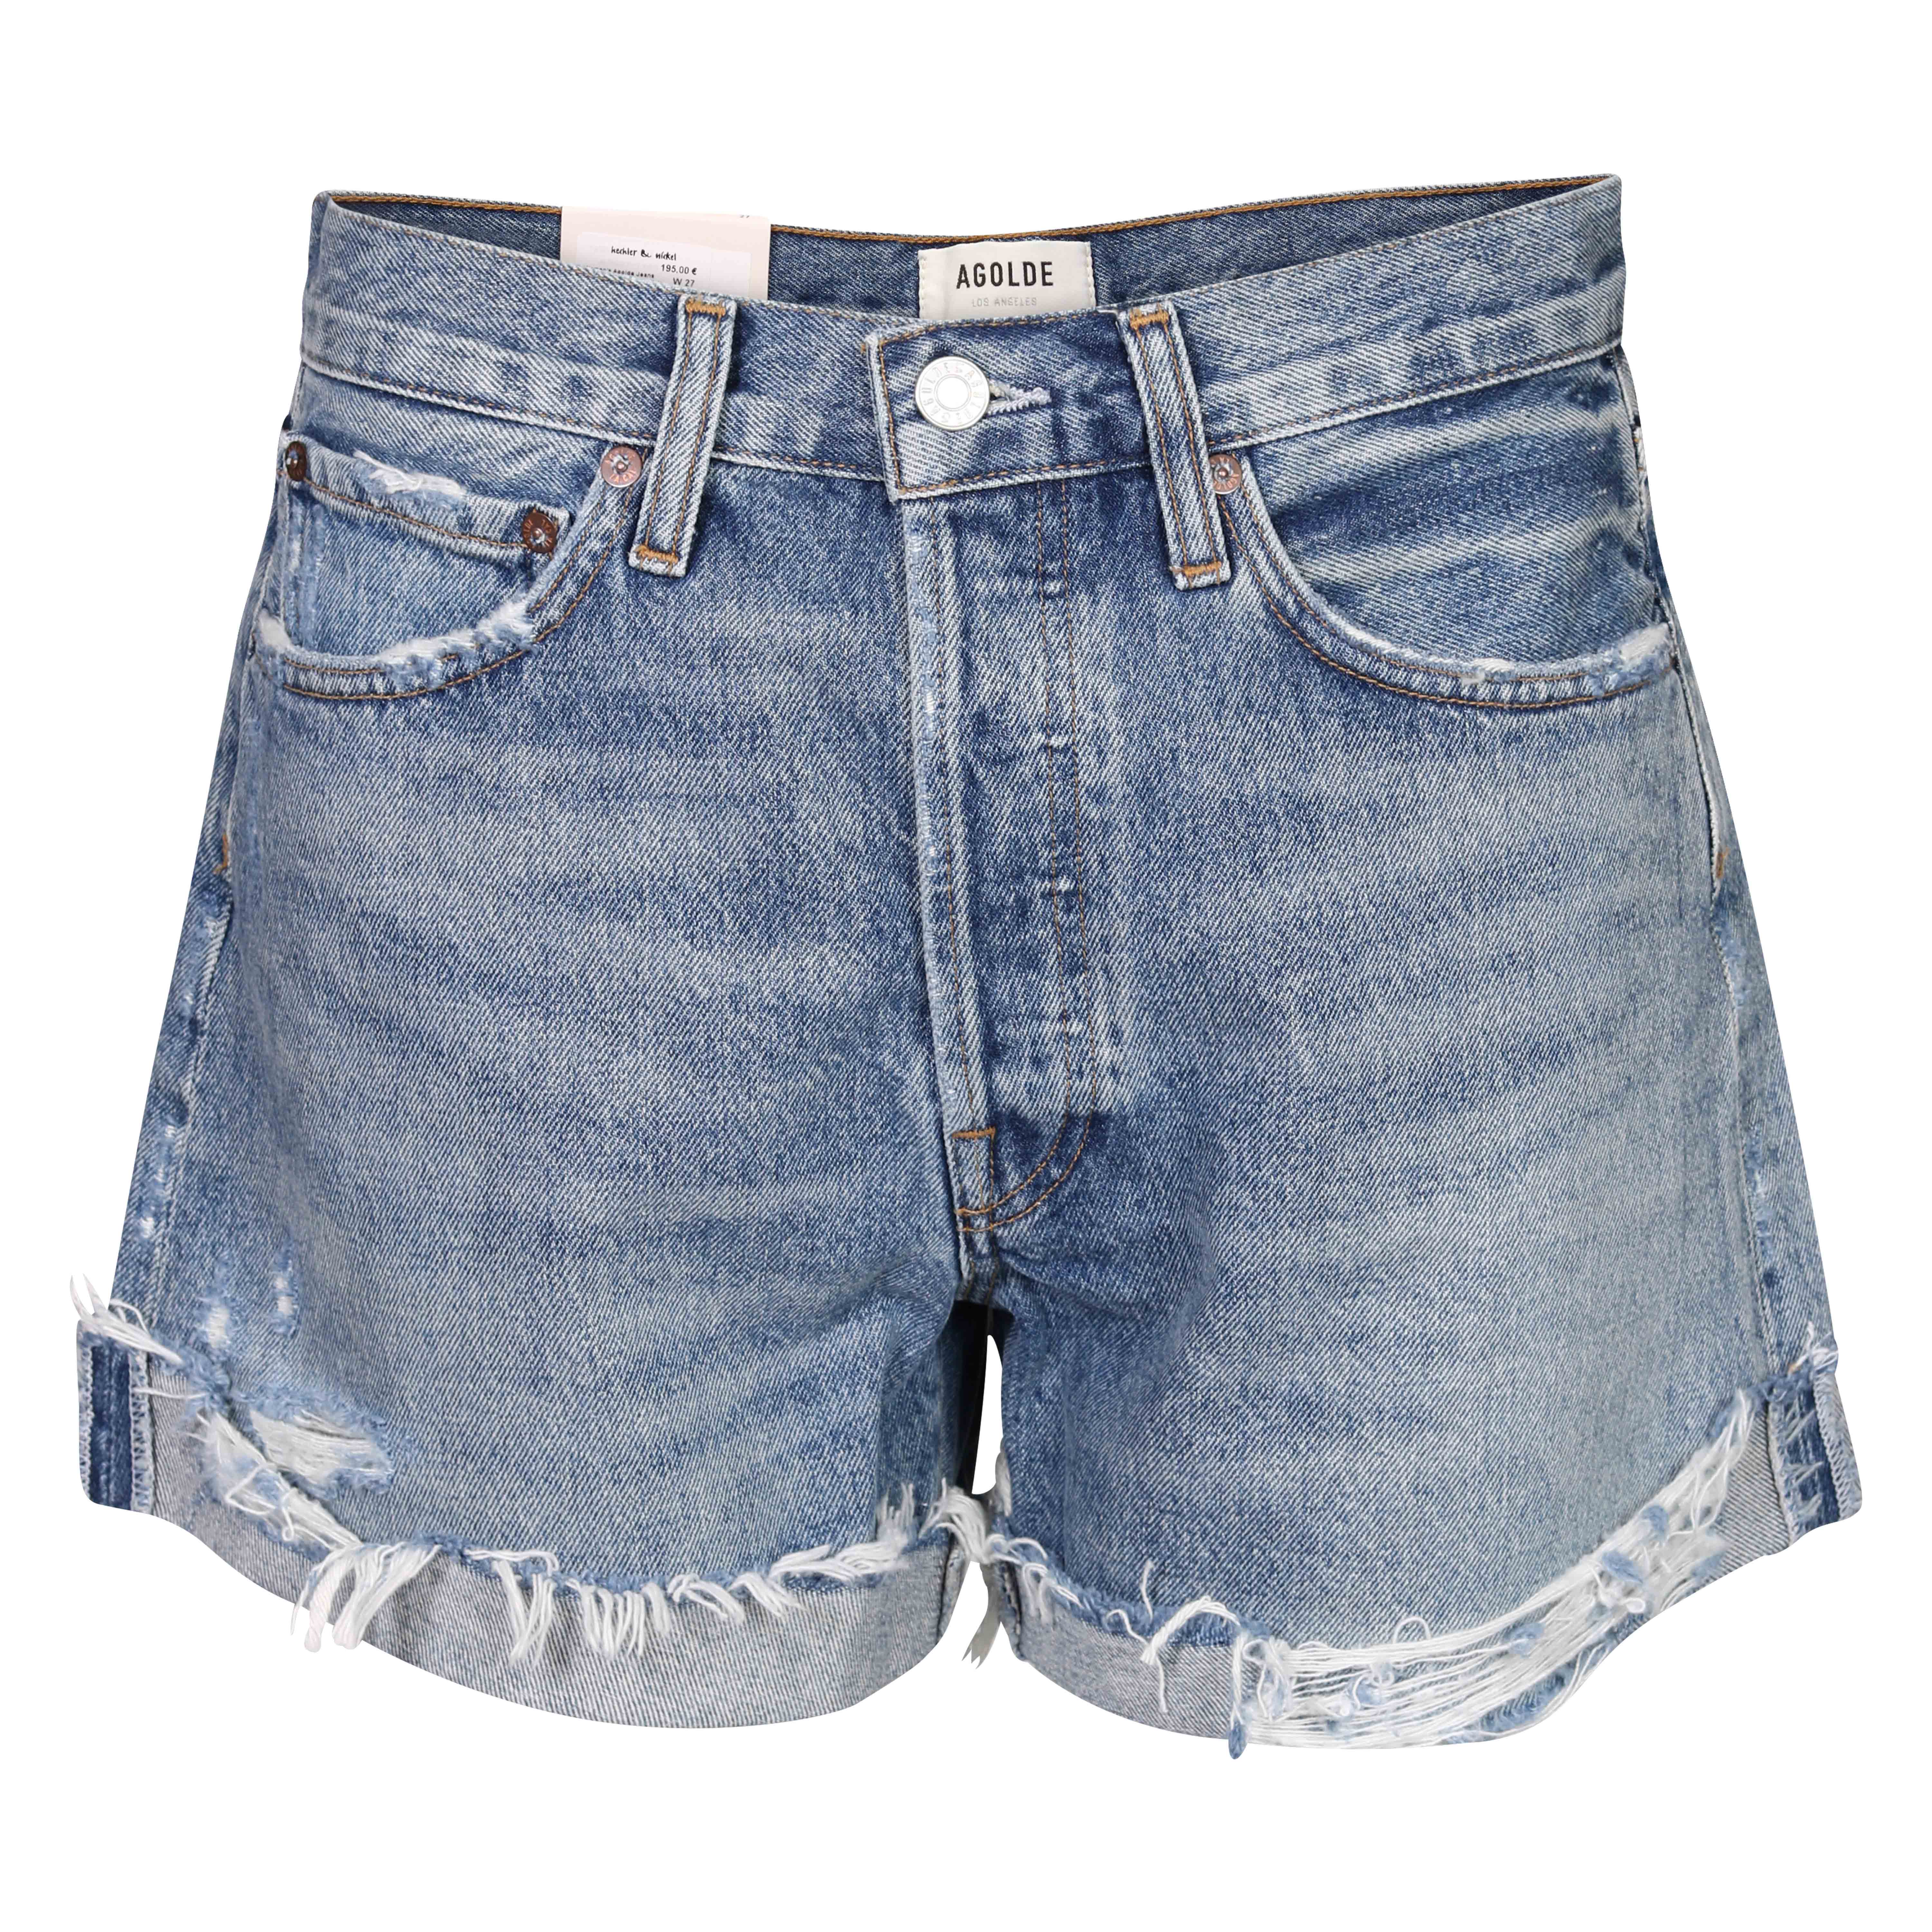 Agolde Jeans Shorts Parker with Cuff